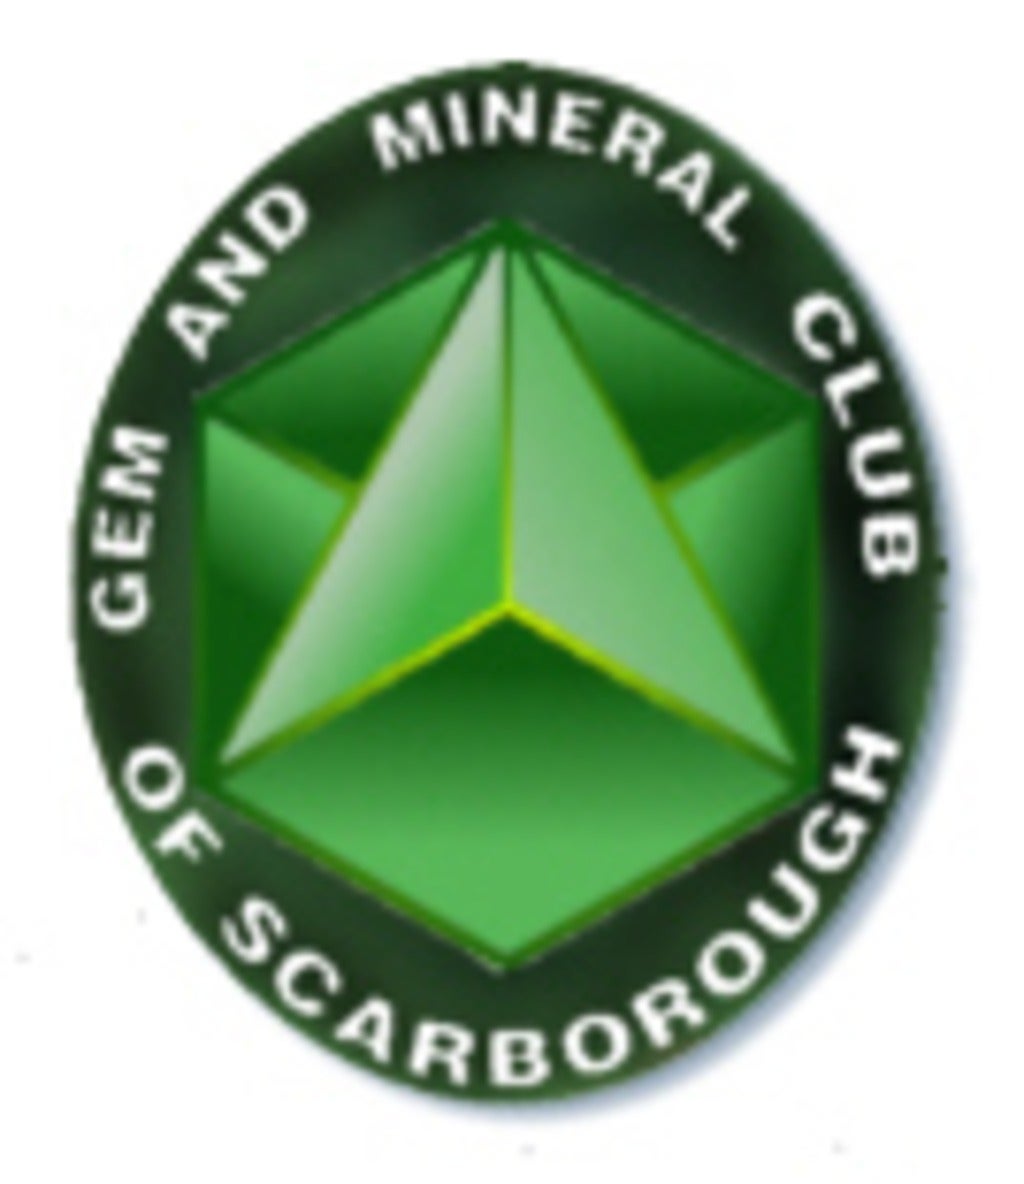 Gem and mineral club of scarborough